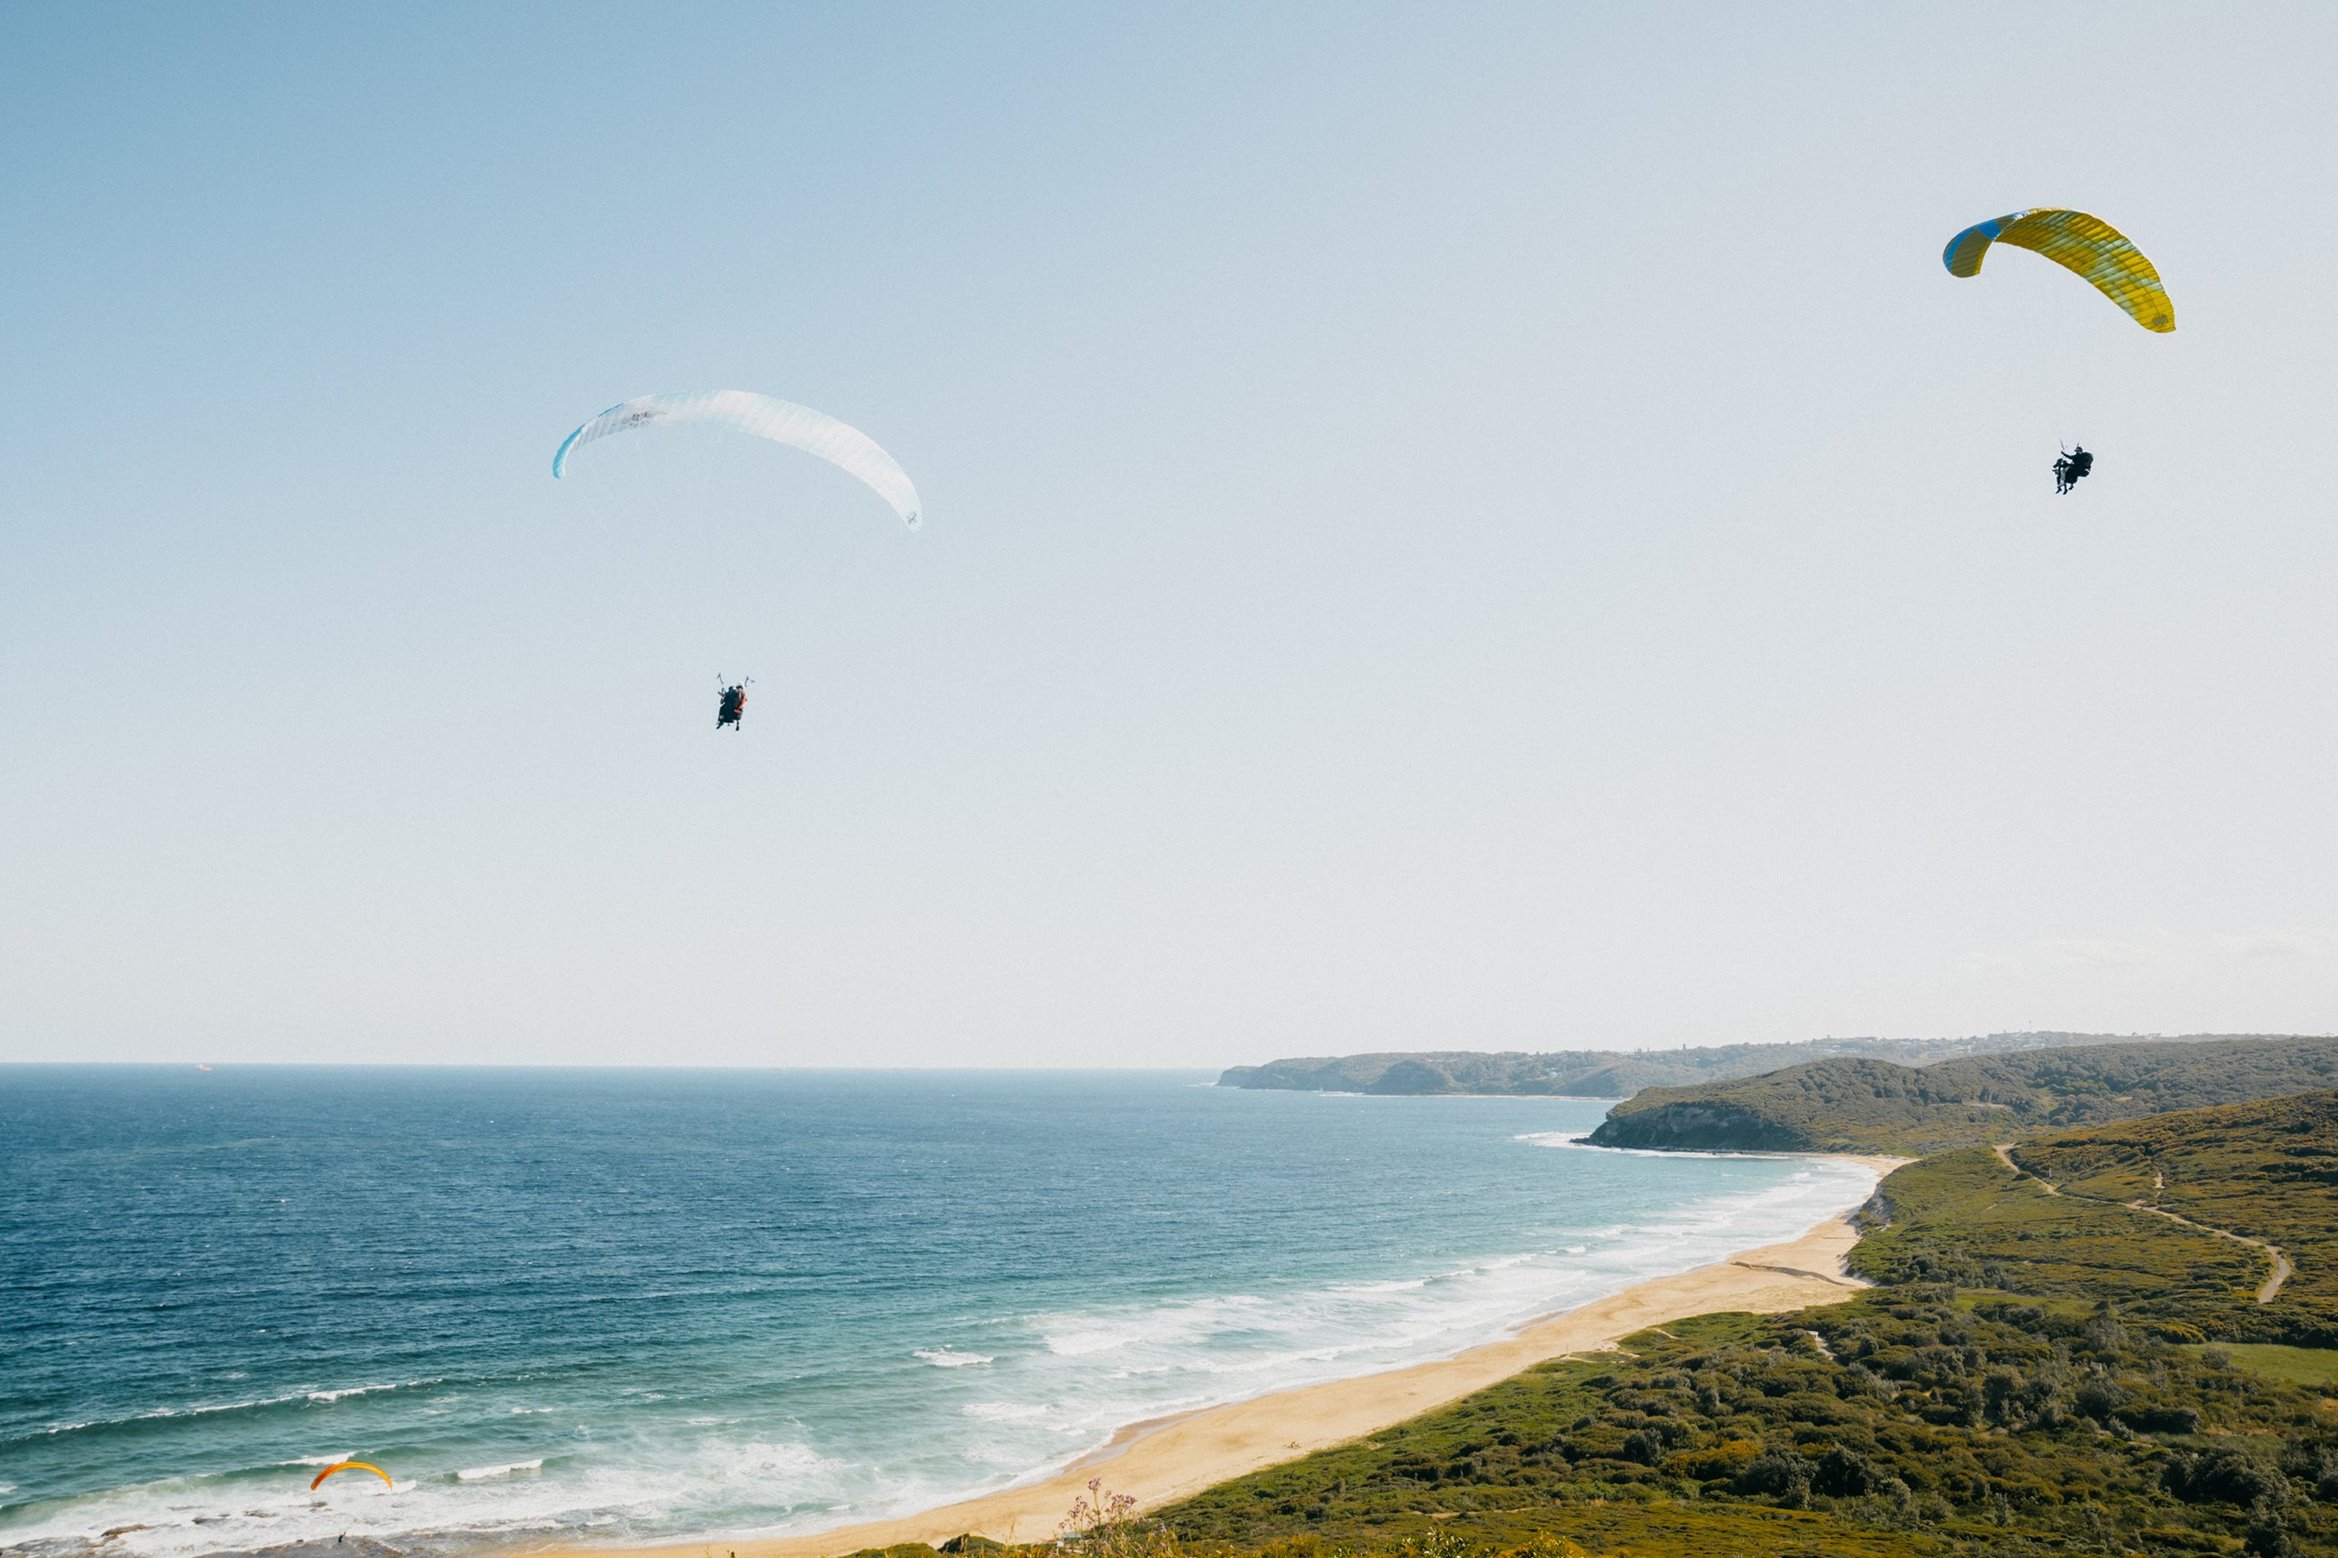 Two paragliders flying over the beach